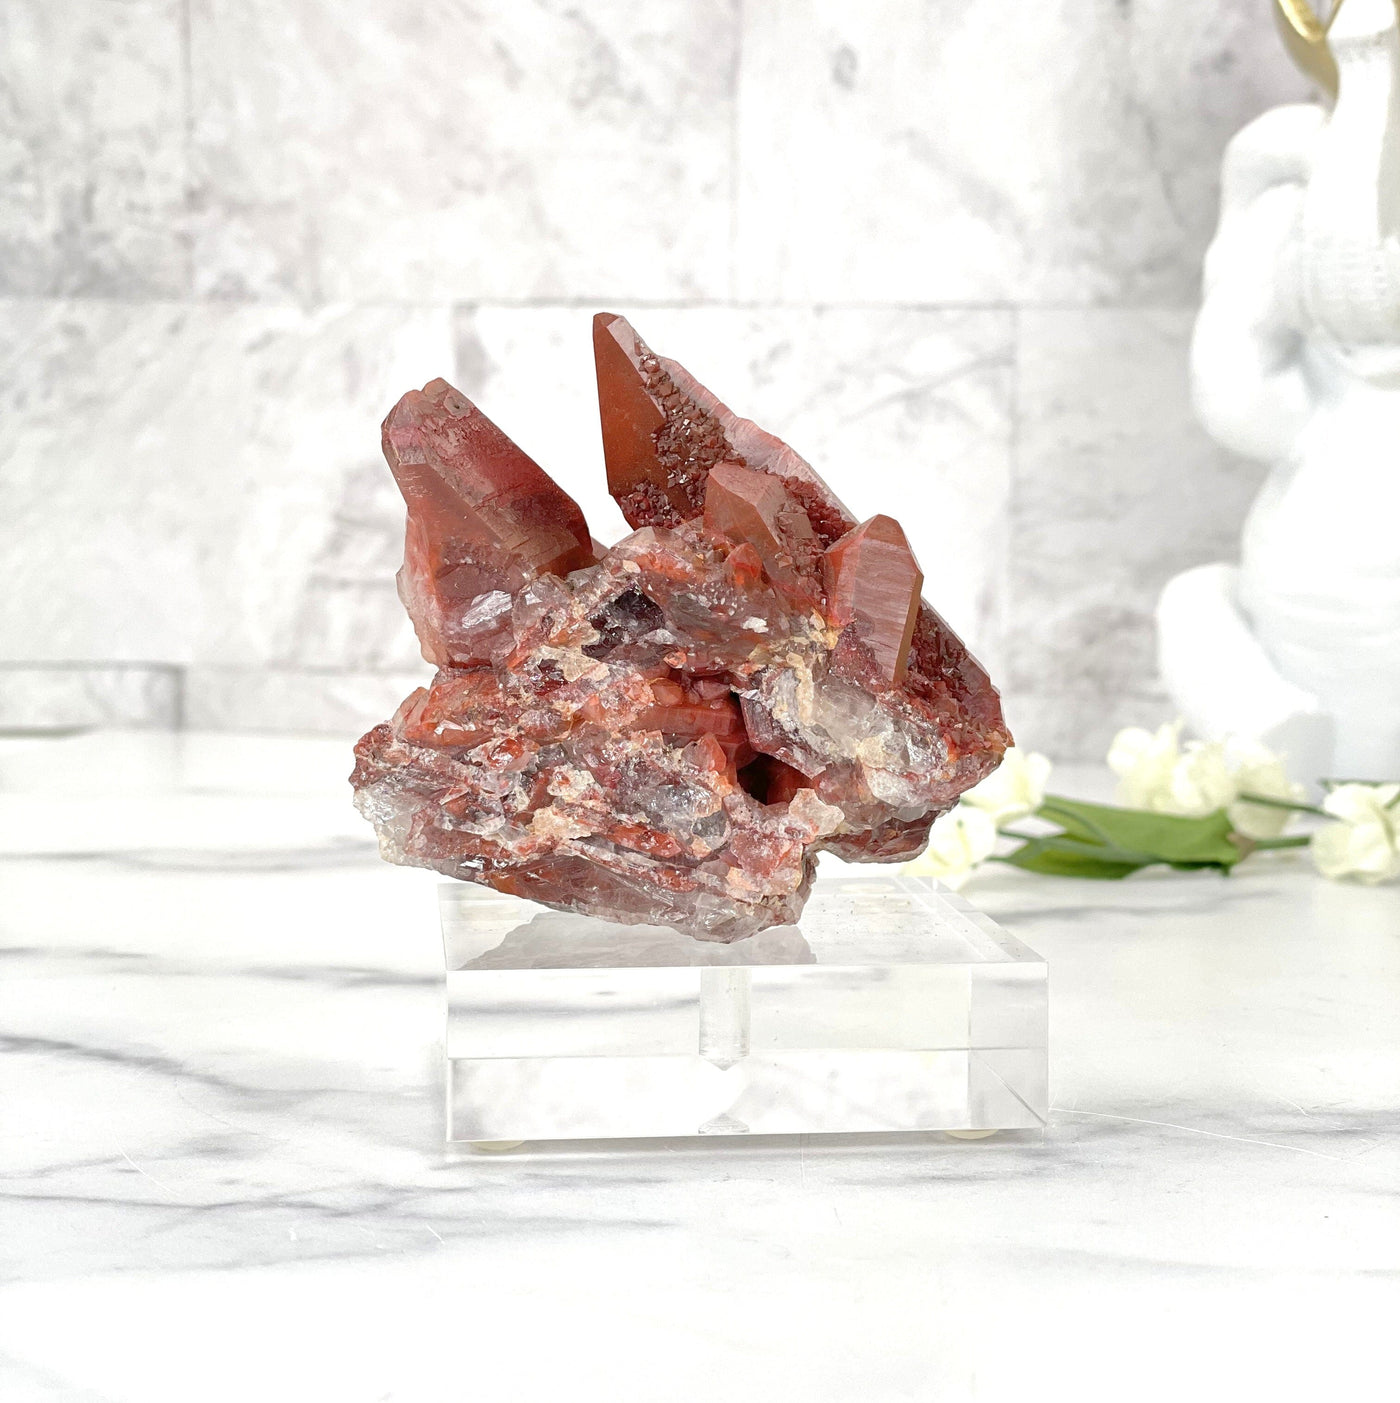 A backside of the Red Hematite Quartz on acrylic stand